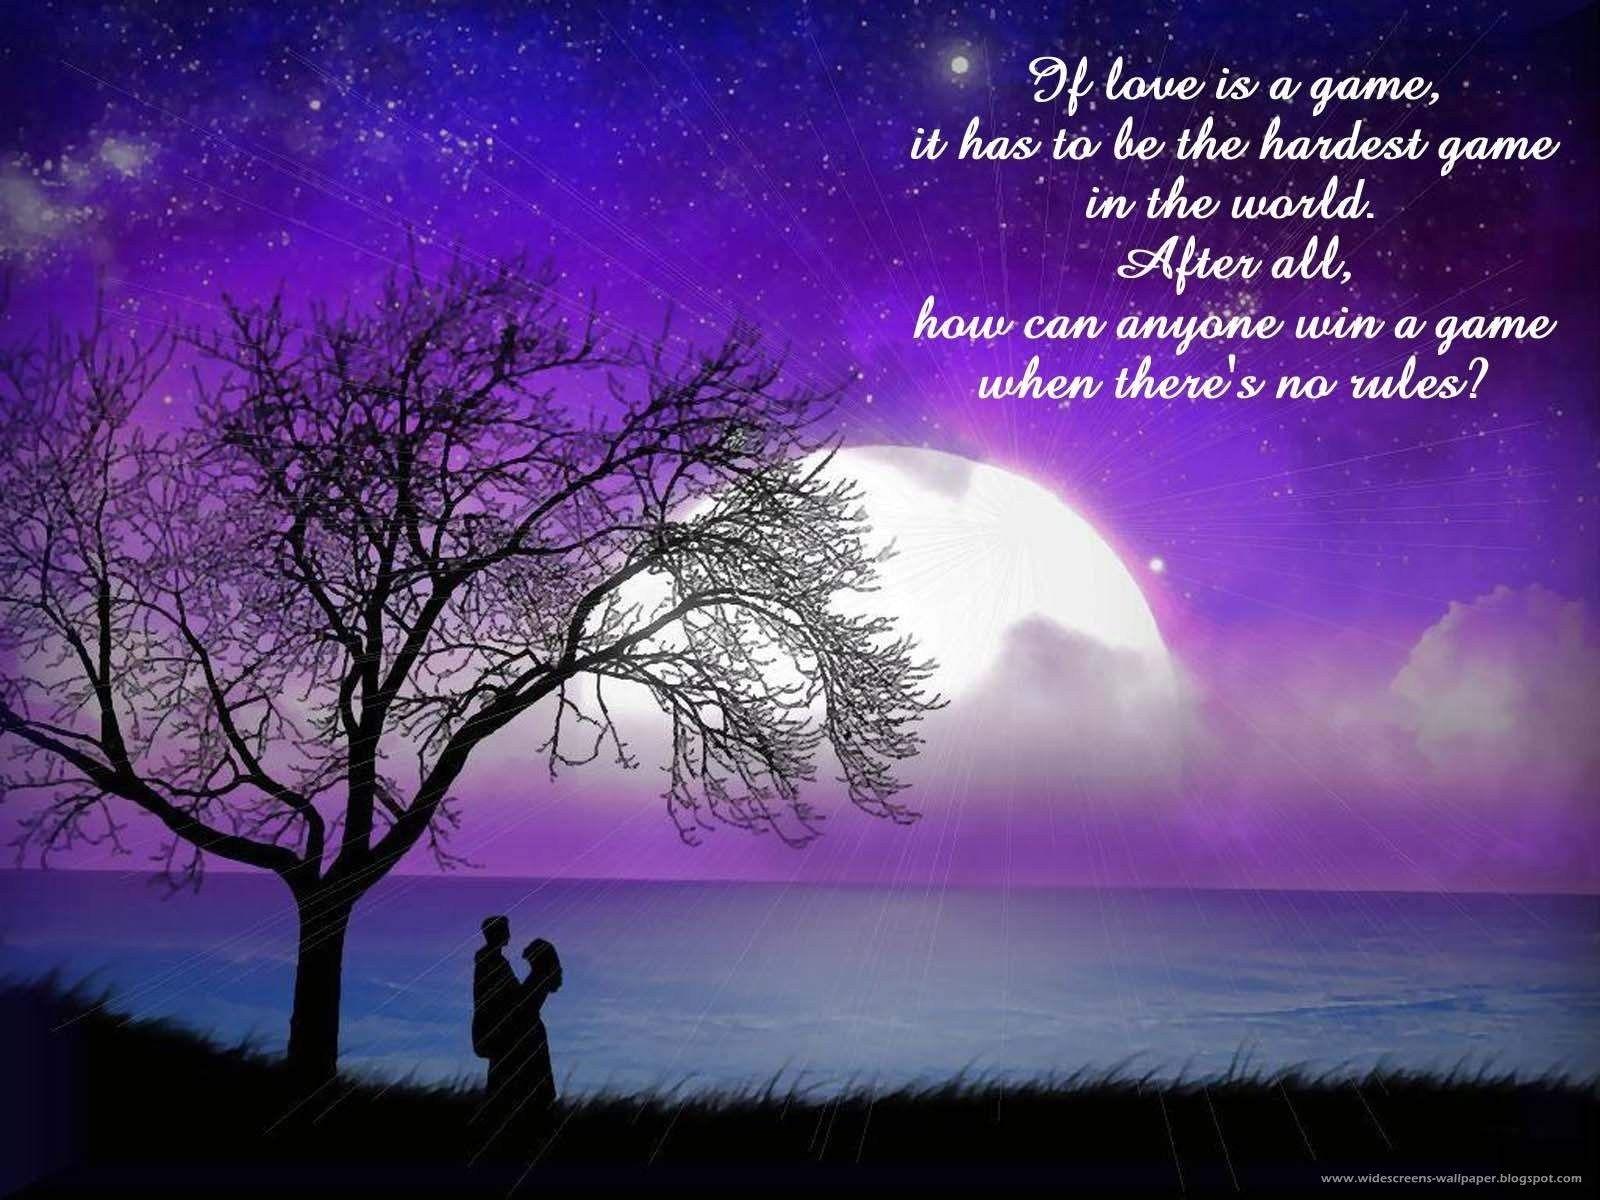 Free Desk Wallpaper: Night moon couple love quotes